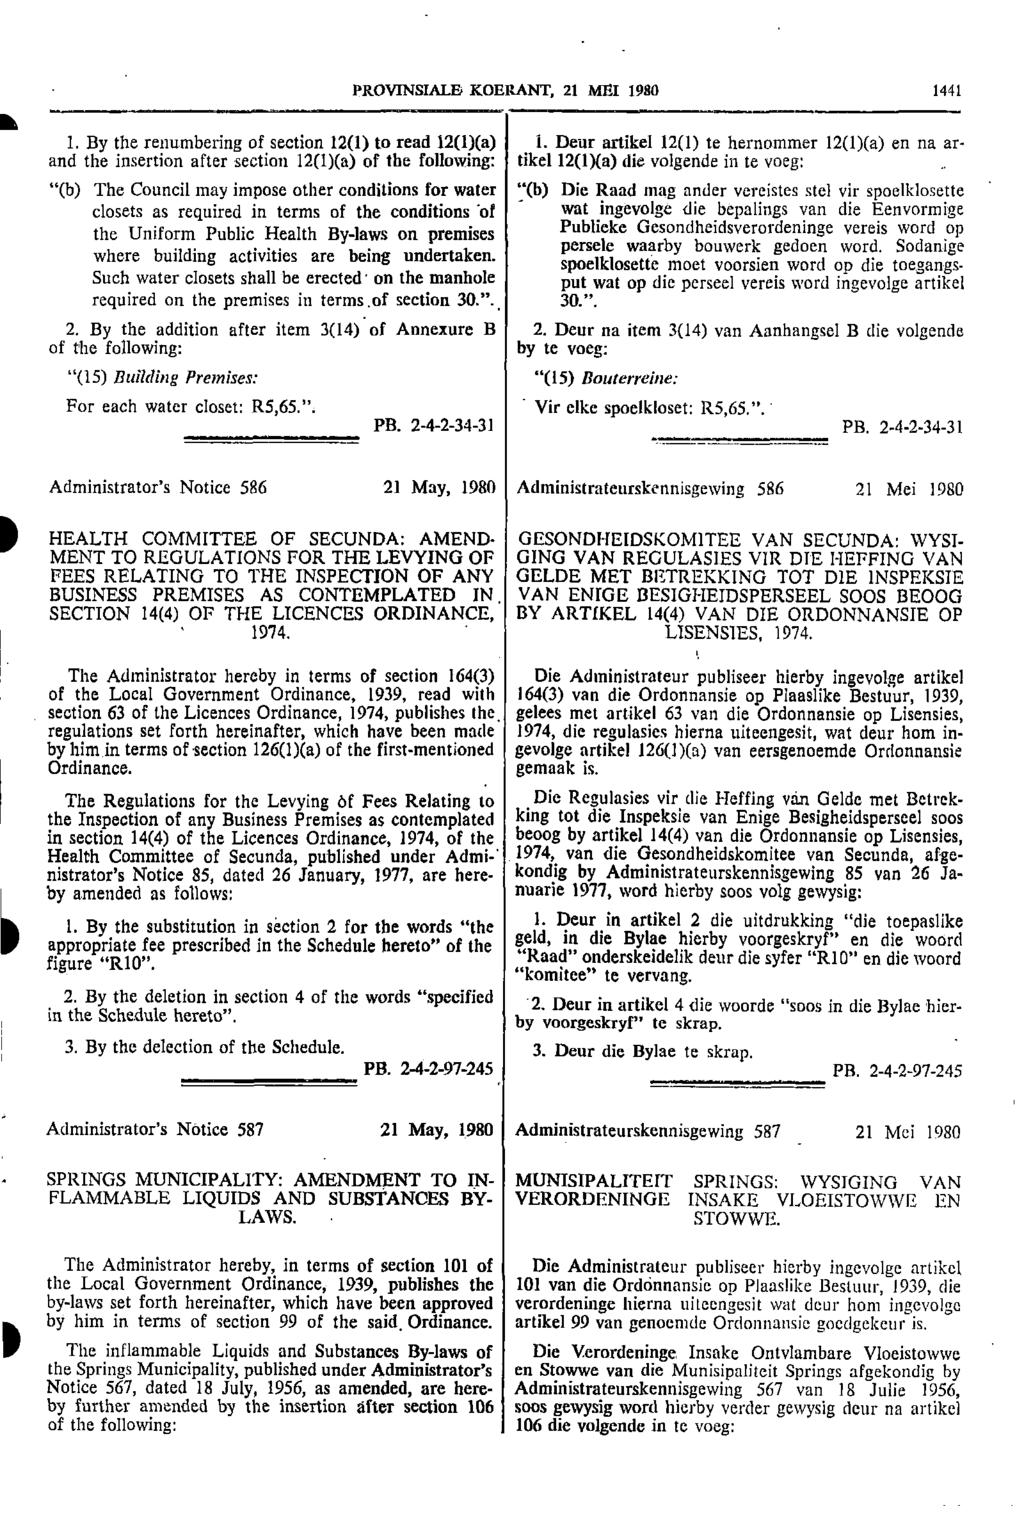 I It PROVINSIALE KOERANT 21 MEI 1980 1441 1 By the renumbering of section 120) to read 12(1)(a) 1 Deur artikel 12(1) te hernommer 12(1)(a) en na ar and the insertion after section 12(1)(a) of the